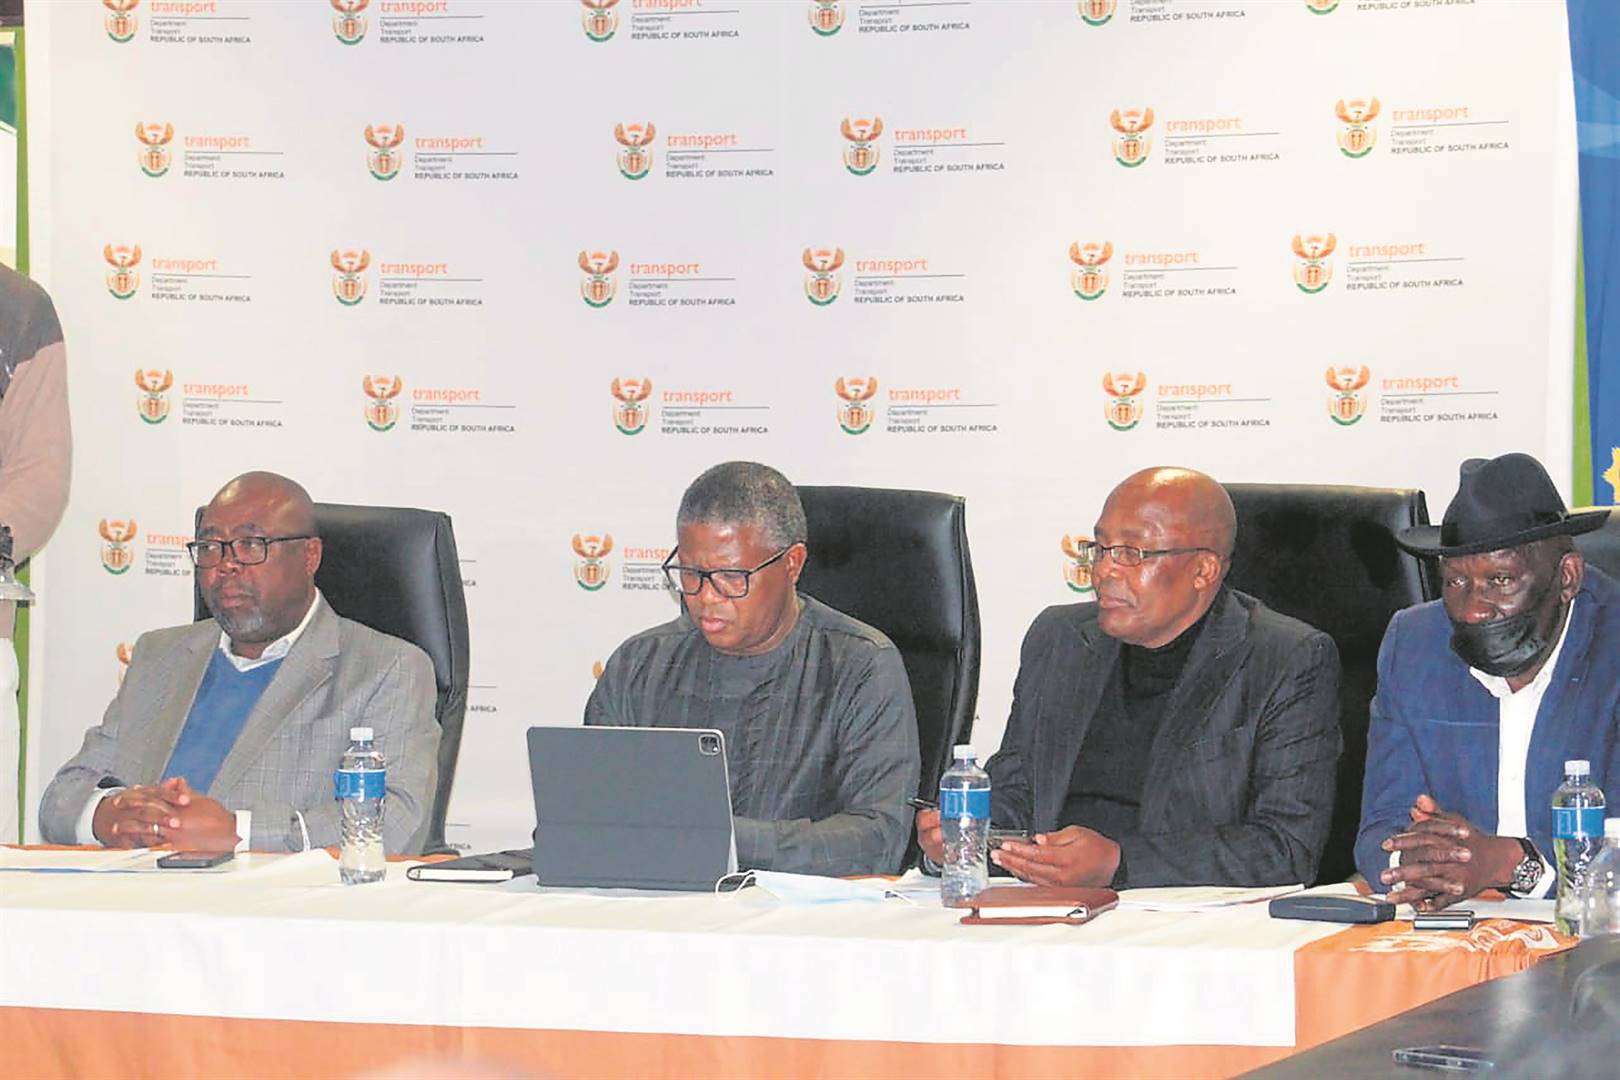 Ministers Thulas Nxesi, Fikile Mbalula, Aaron Motsoaledi and Bheki Cele at a media briefing with the freight and trucking industry.        Photo by Kgomotso Medupe